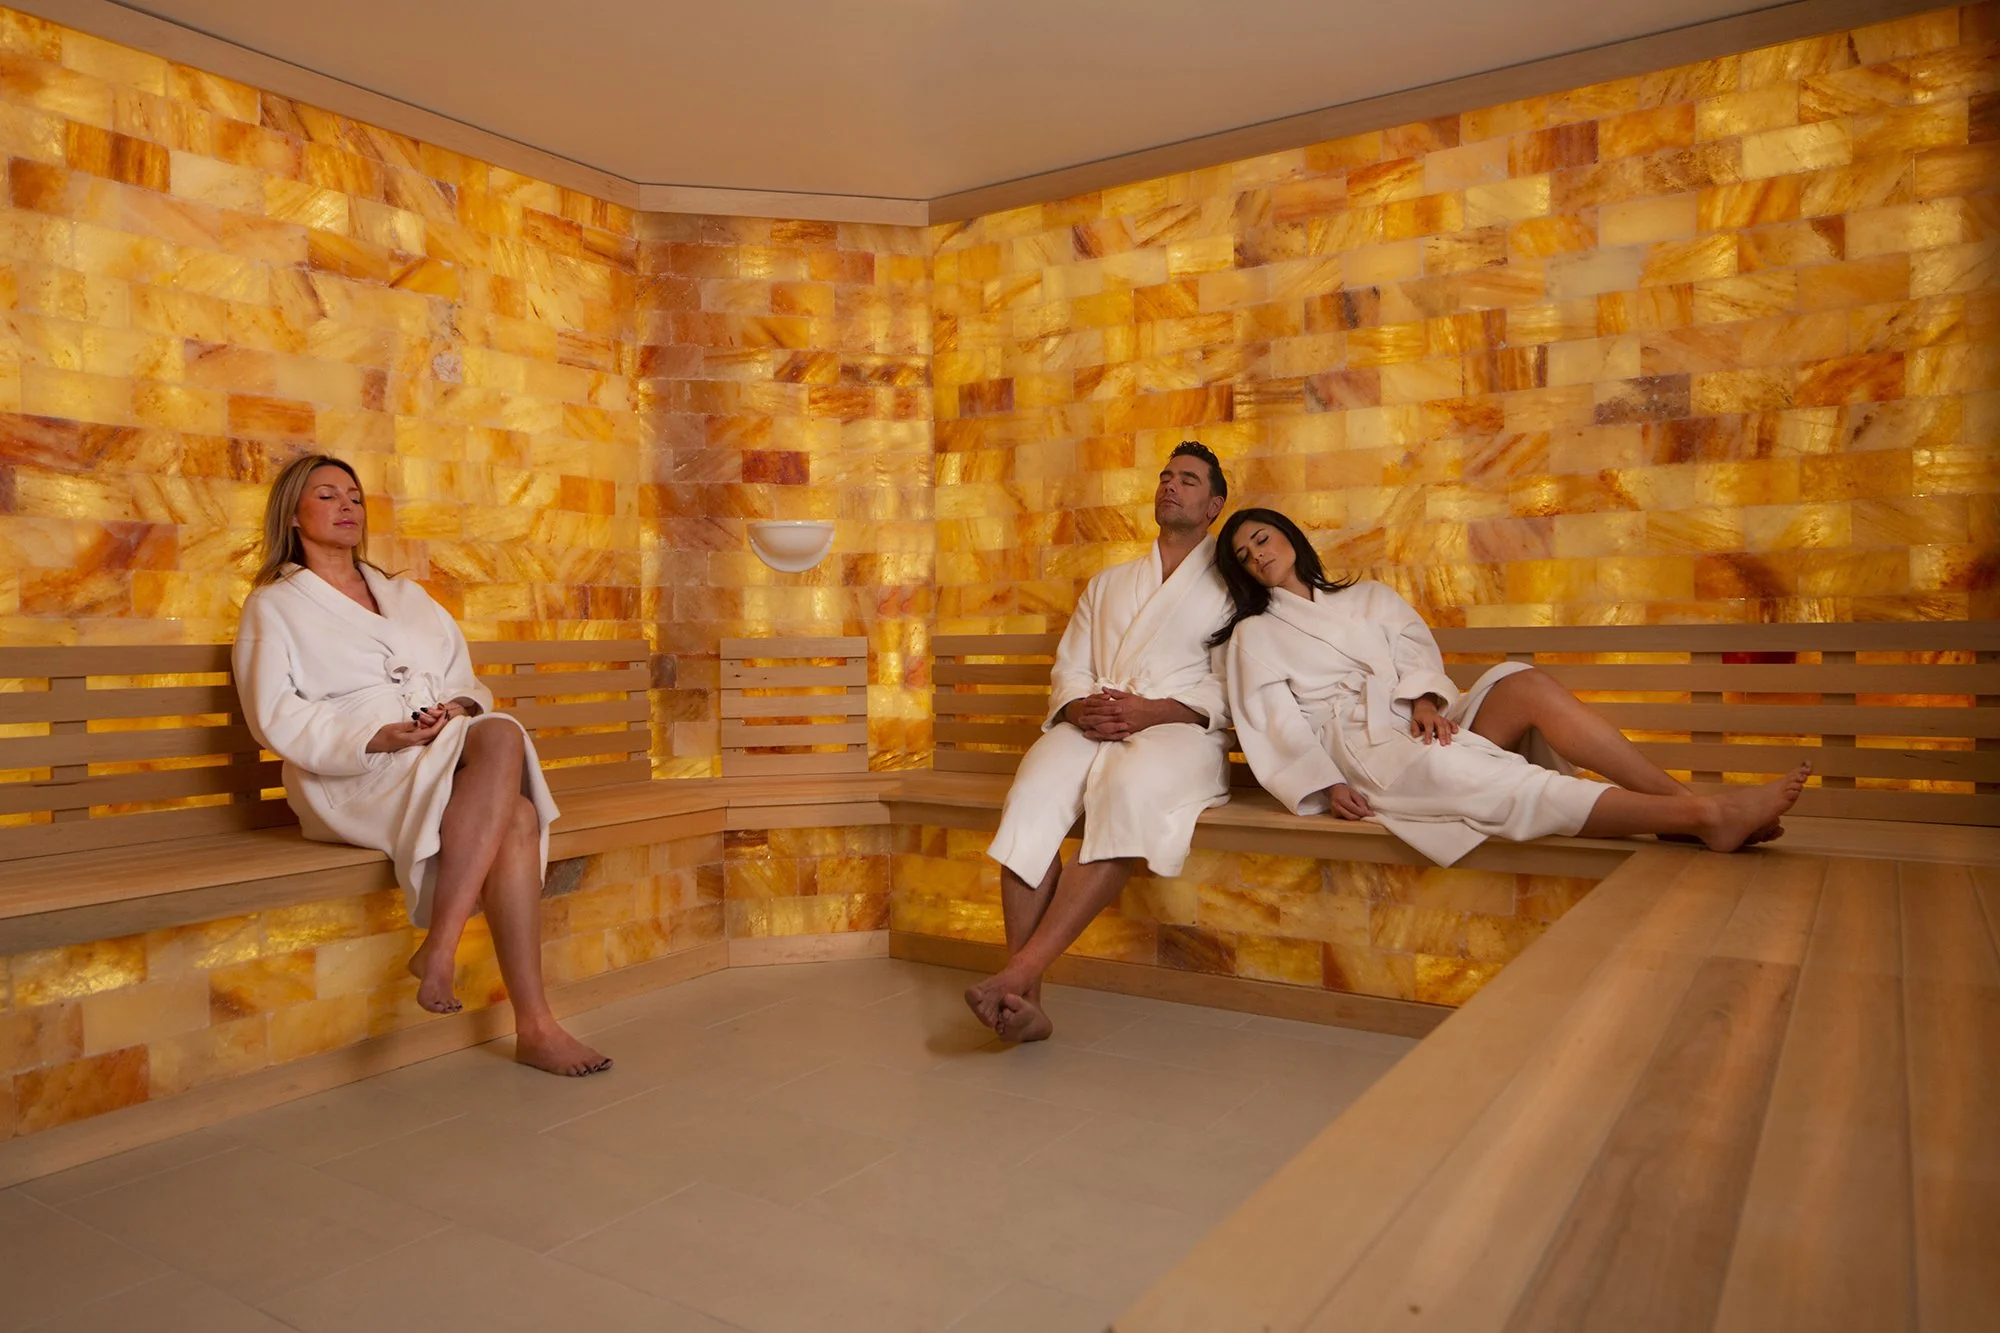 a man and women wrapped in bath towels, relax in a tranquil Himalayan salt room with illuminated salt walls, enjoying the warm glow and therapeutic atmosphere.